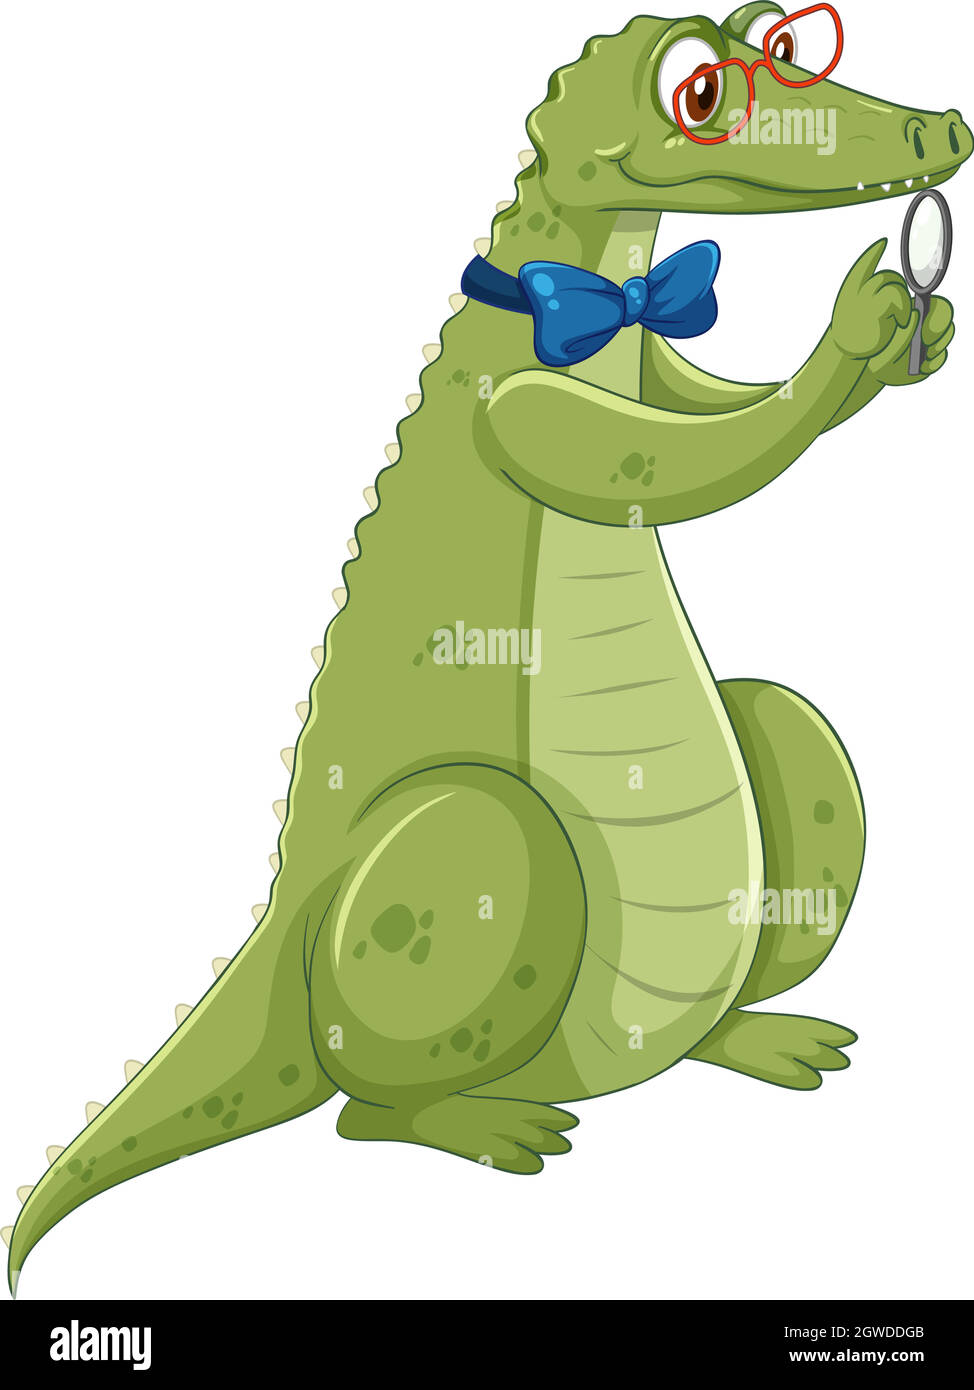 Nerdy crocodile cartoon character isolated on white background Stock Vector